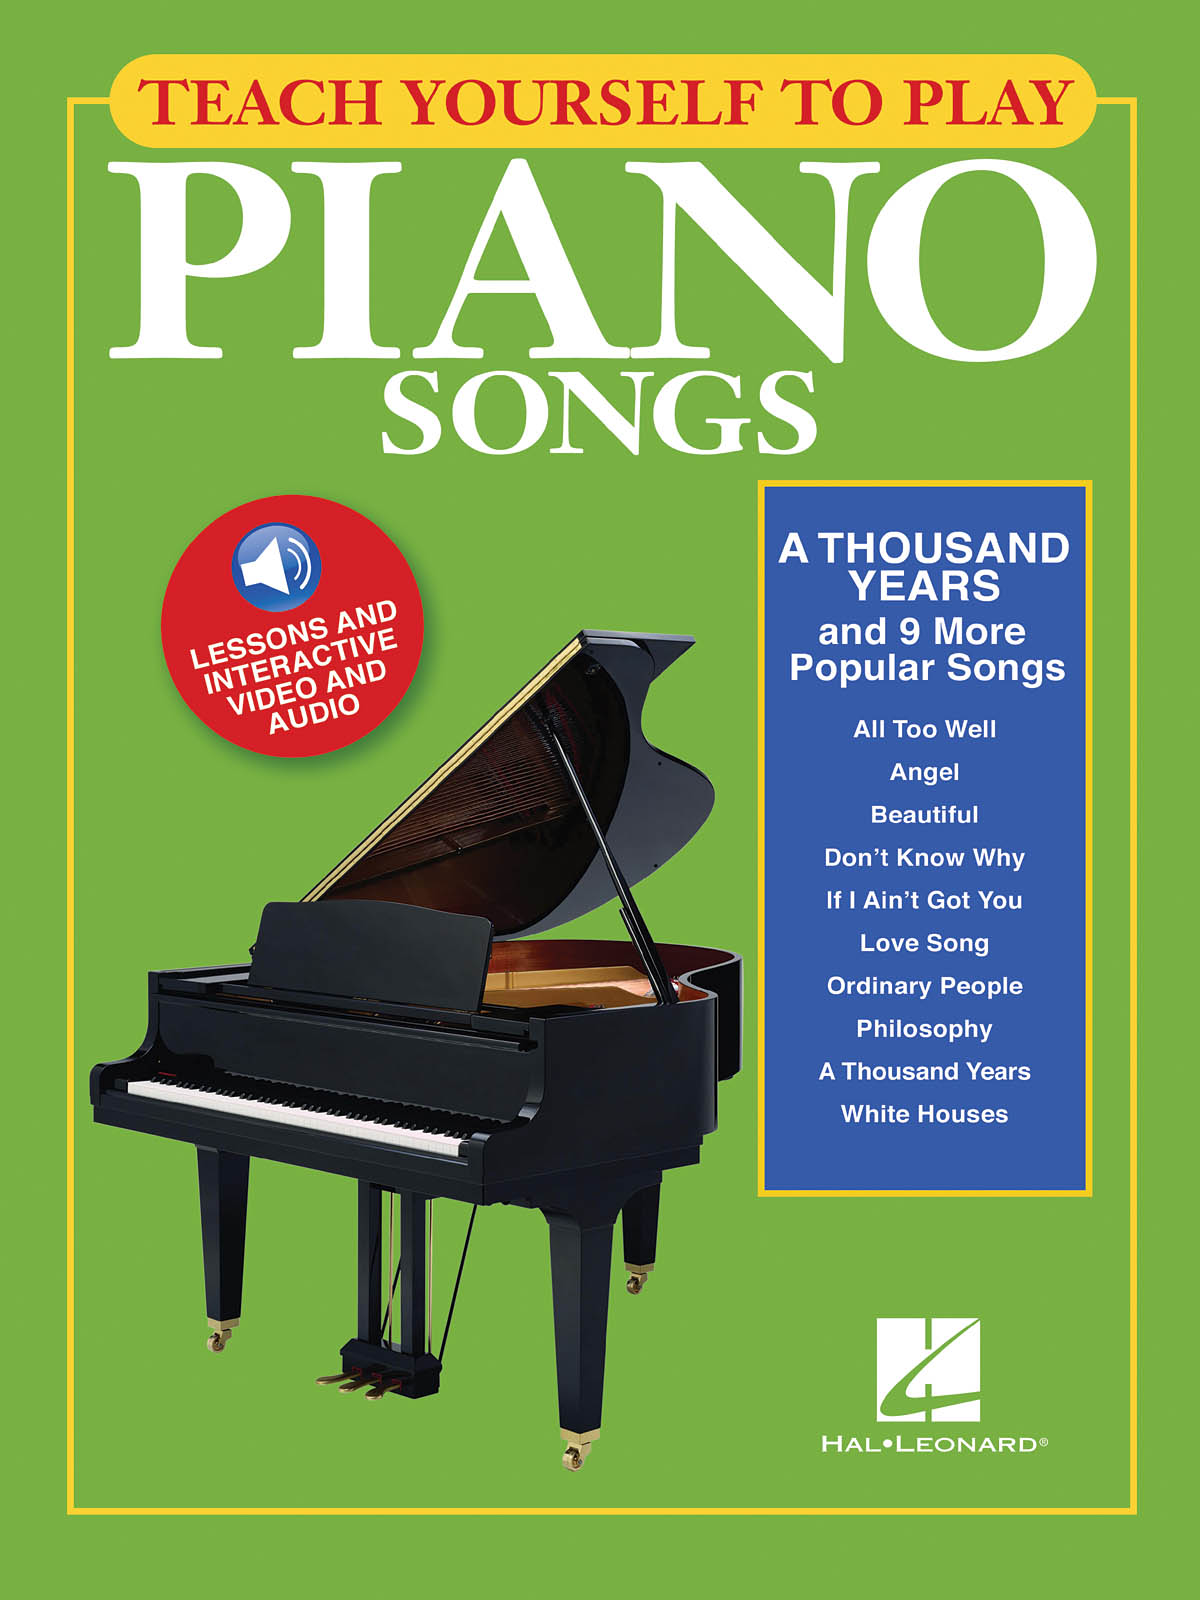 A Thousand Years And 9 More Popular Songs - Teach Yourself To Play Piano Songs klavír učebnice